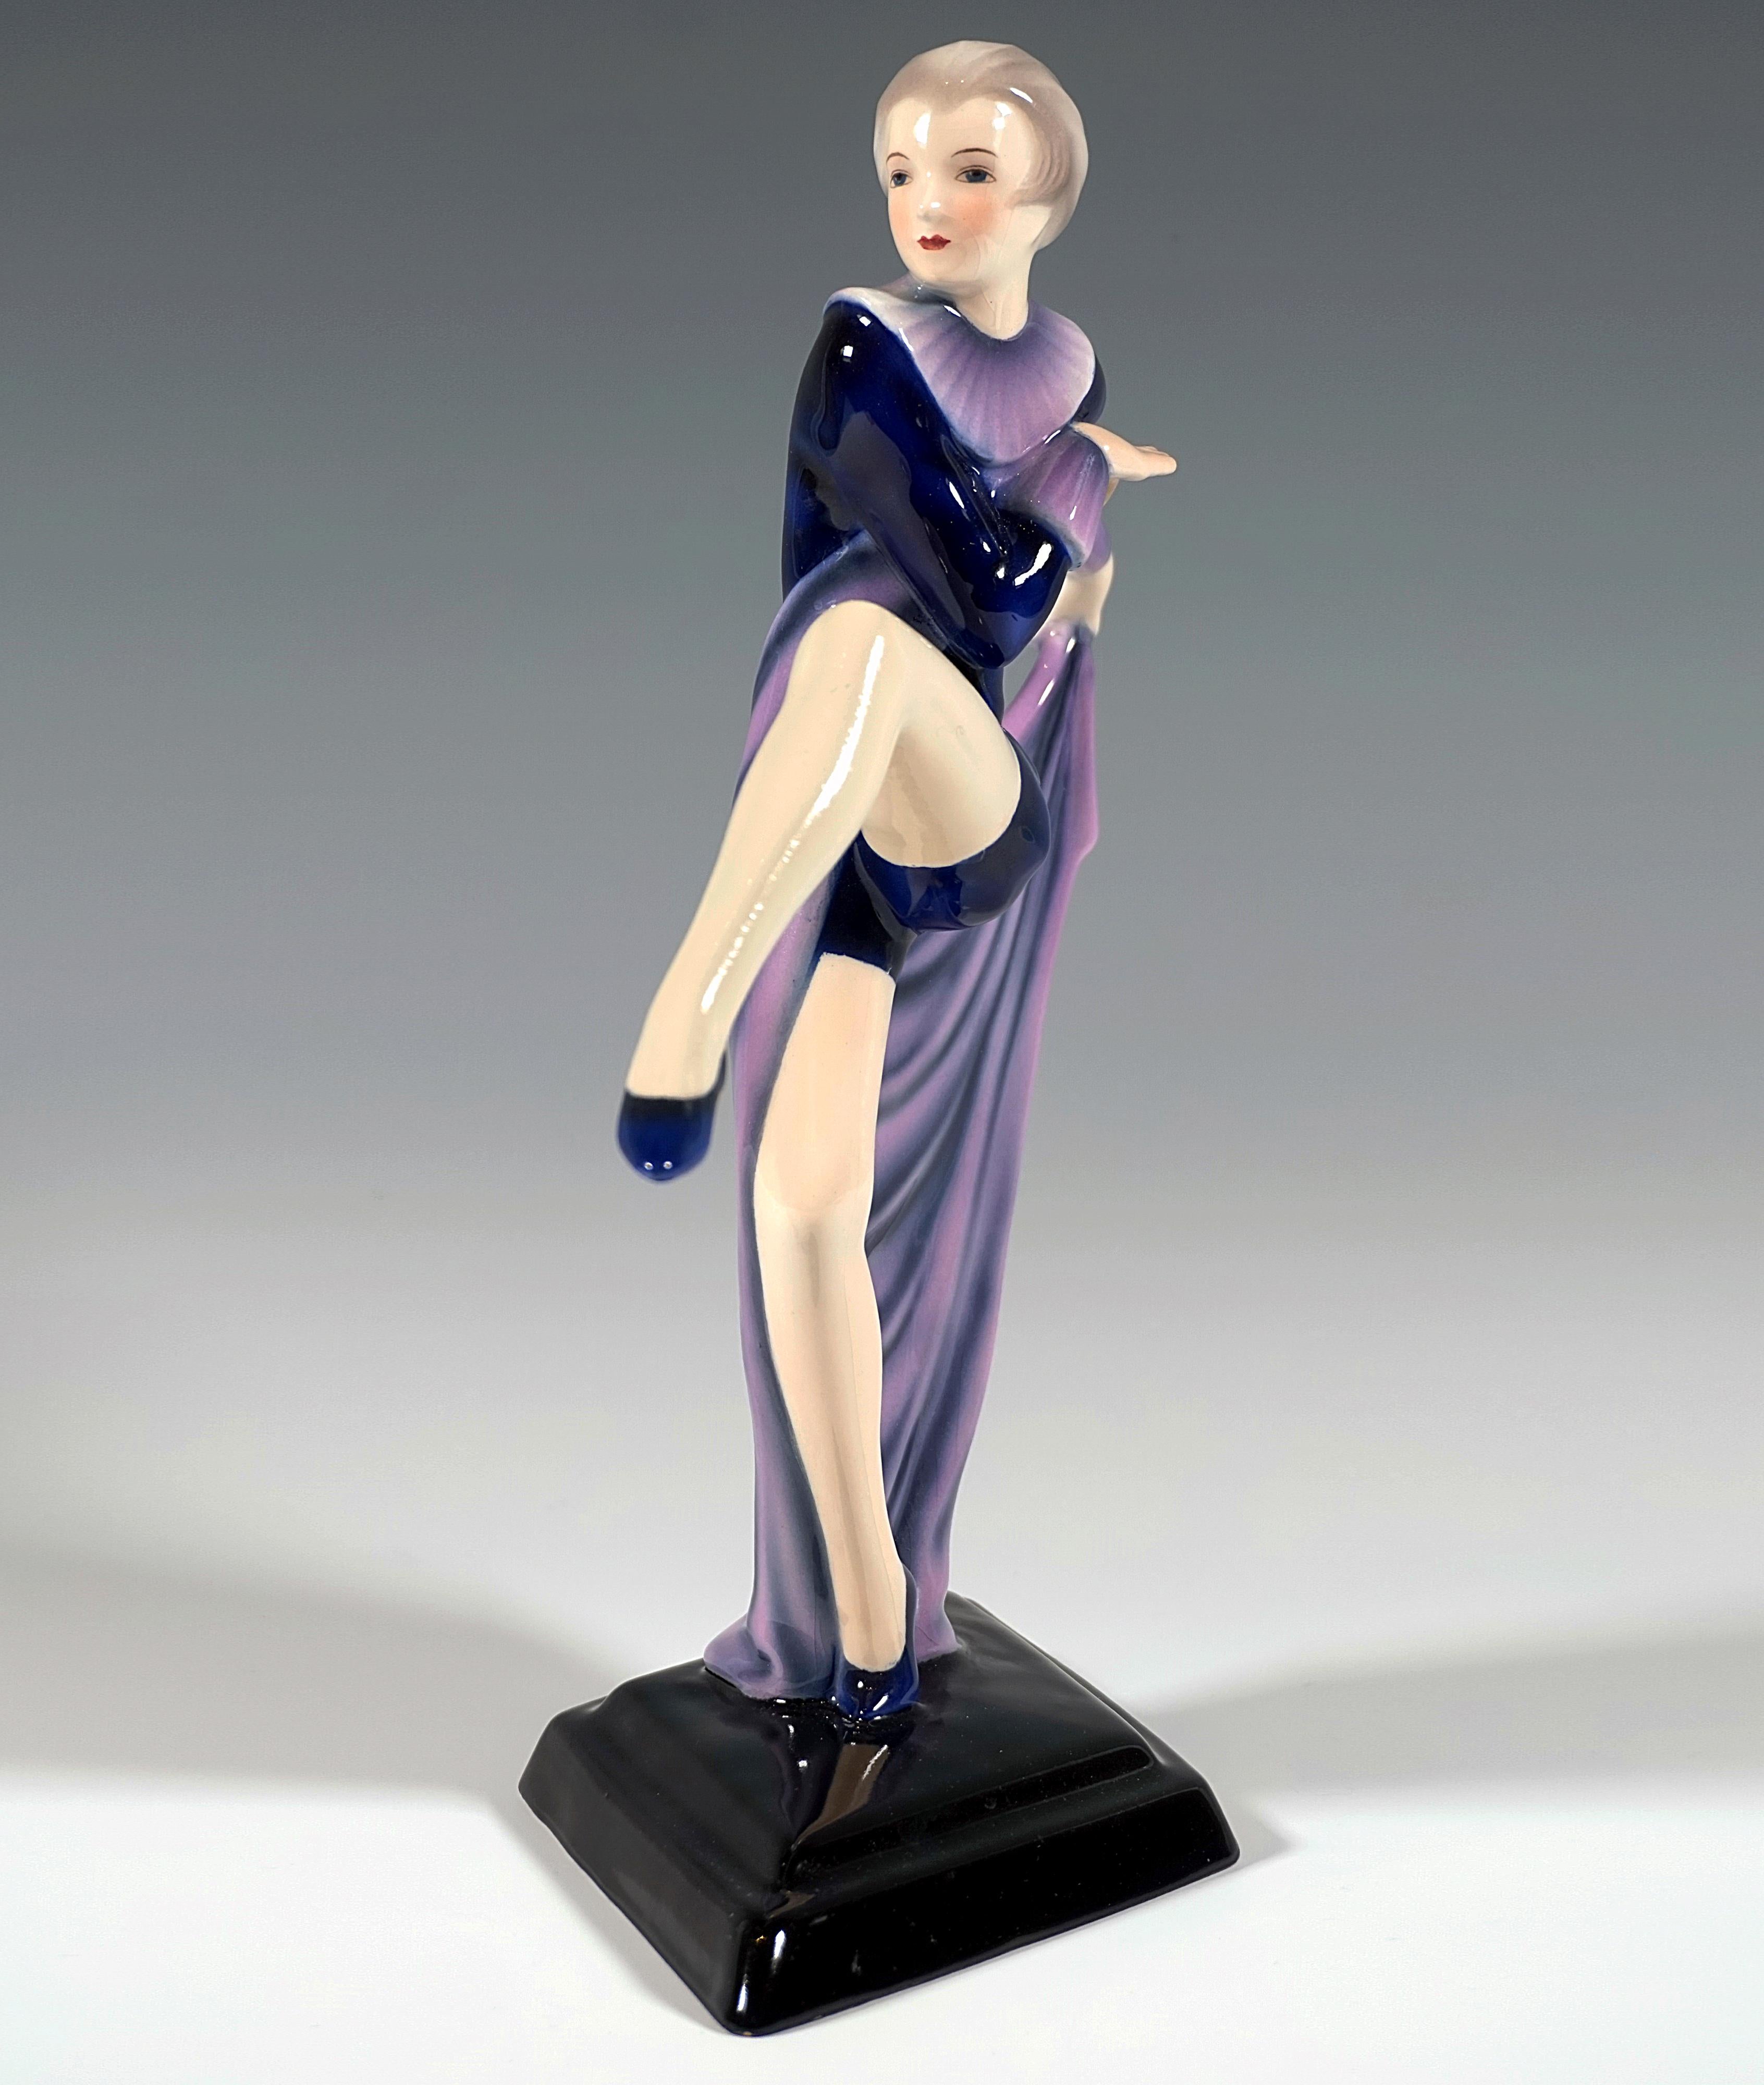 Exquisite porcelain figurine of the 1930:
Aparte dancer in a tight-fitting dark blue costume with short trouser legs and ruff, gymnastic shoes on her feet, balancing on the ball of her right toe, throwing her left leg up to the front, turning her